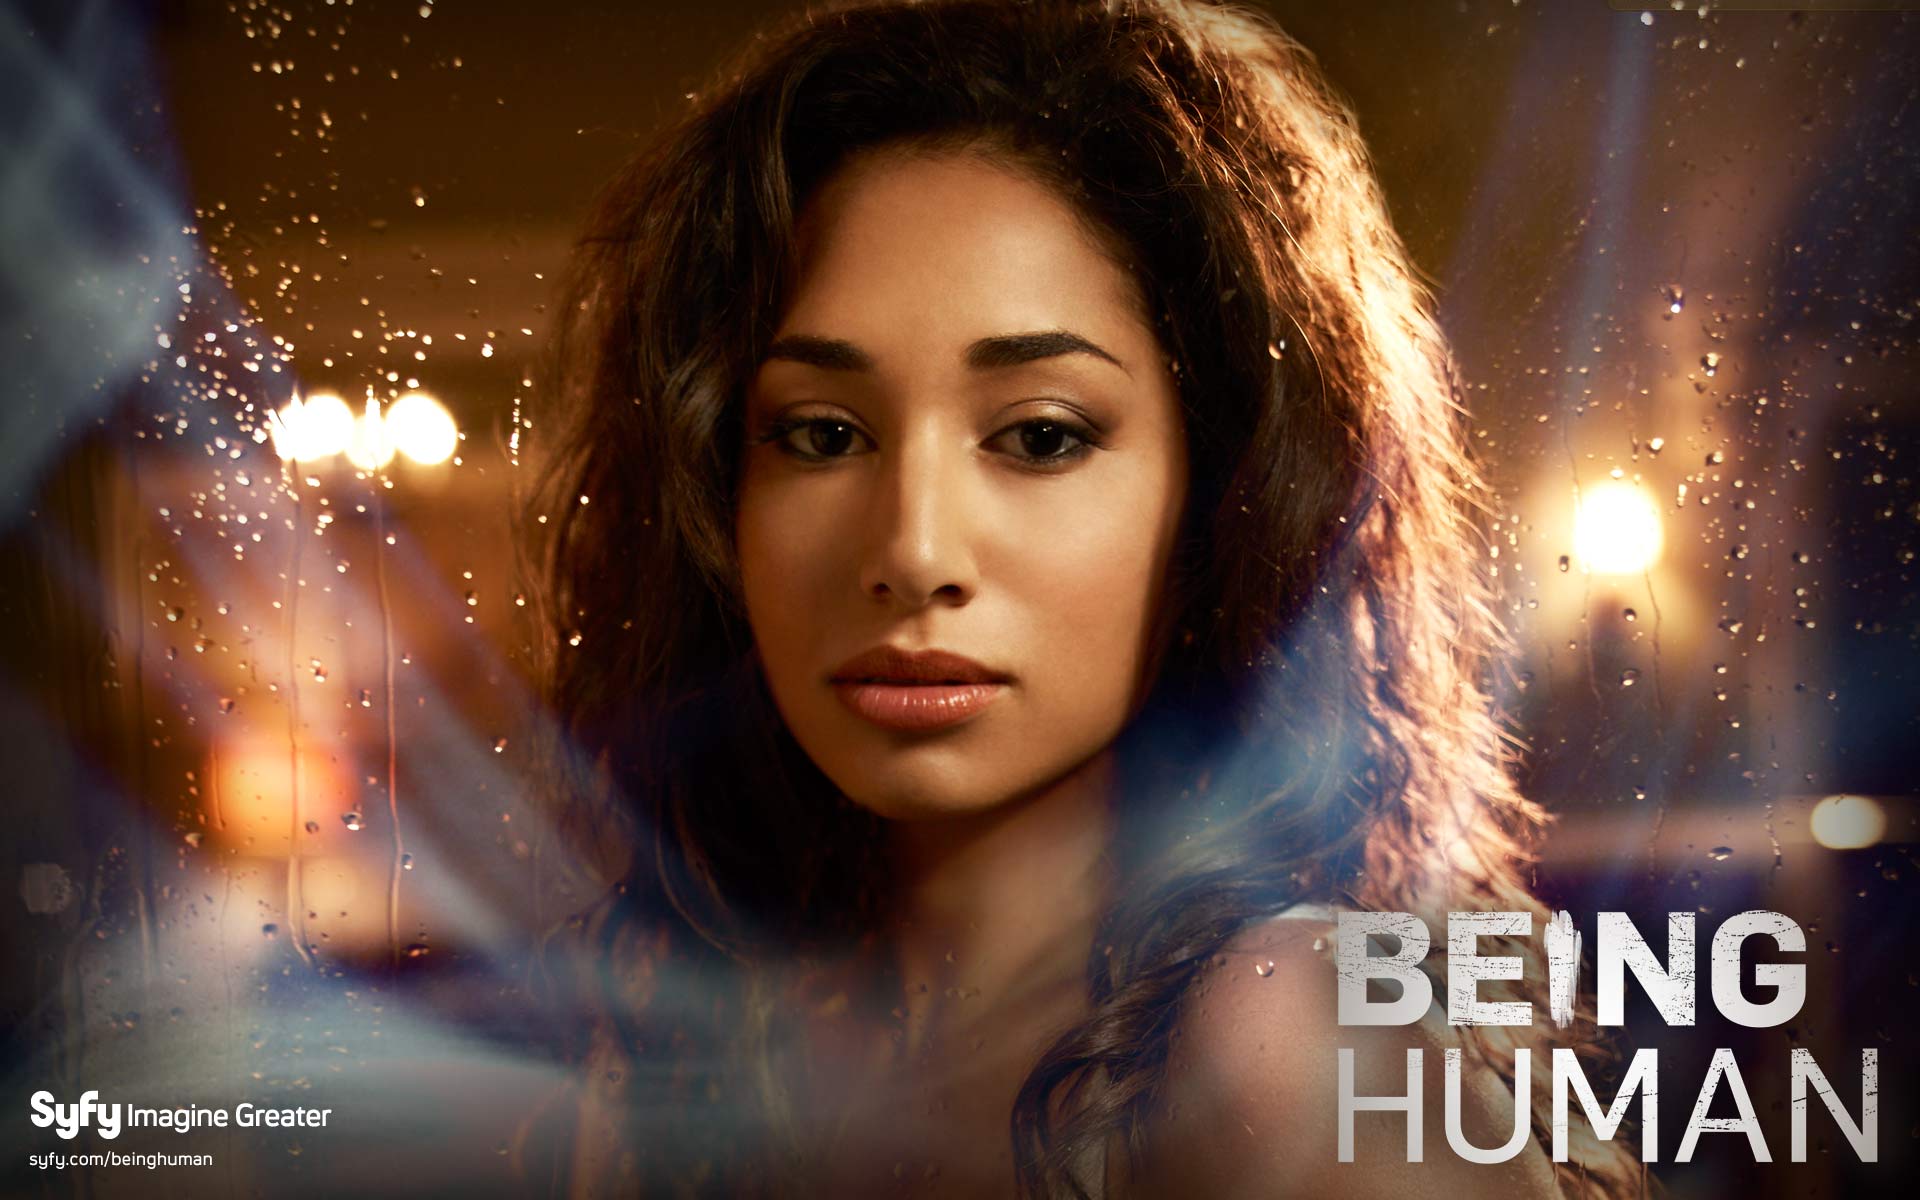 being human hd wallpaper,beauty,flash photography,photography,poster,movie